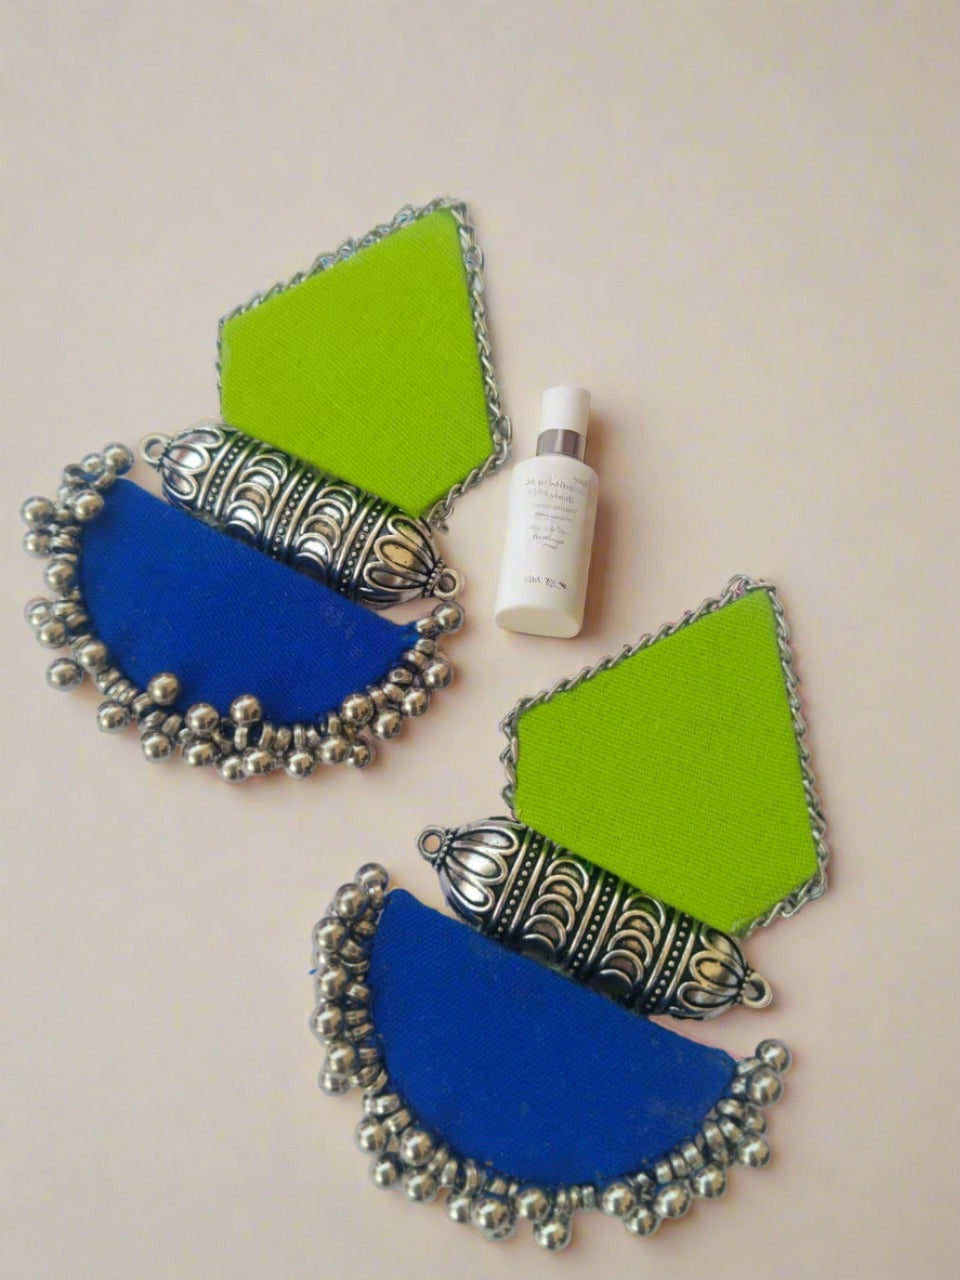 Light green and dark blue earrings with silver tabiz and beads on white backdrop